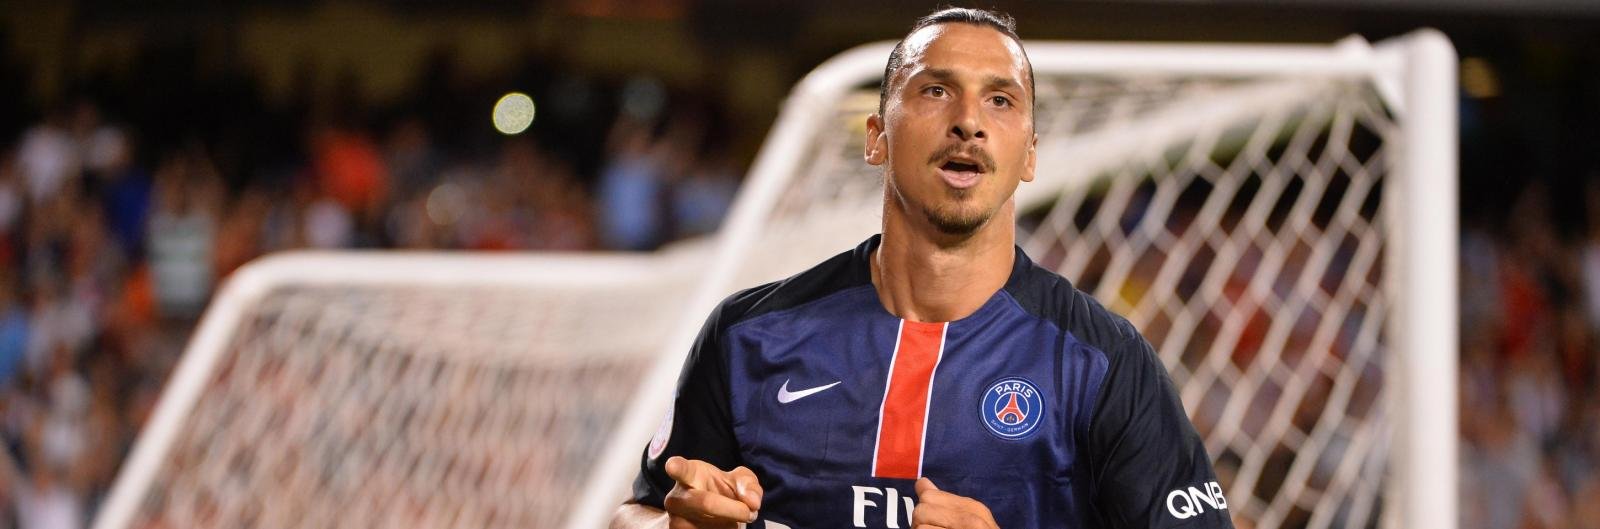 Manchester United closing in on world-class 50-goal striker after Paris Saint-Germain exit